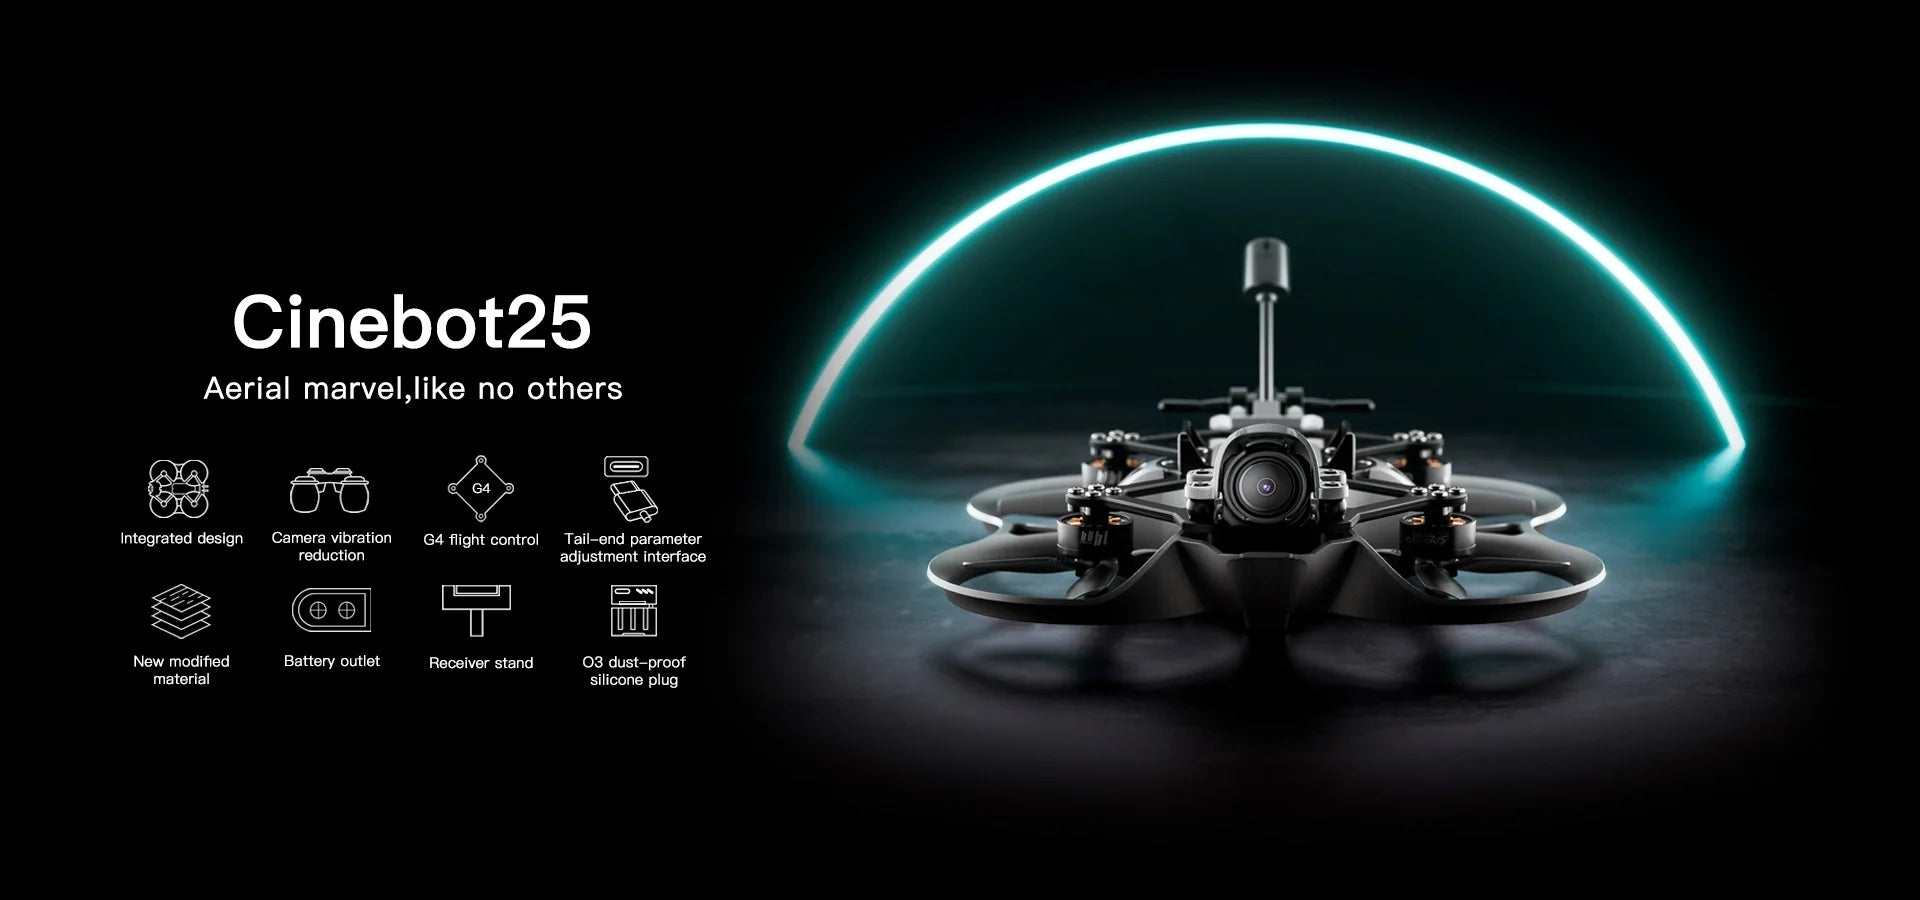 GEPRC Cinebot25 HD Wasp FPV Drone, Cinebot25 Aerial marvel,like no others G4 Integrated design Camera vibration G